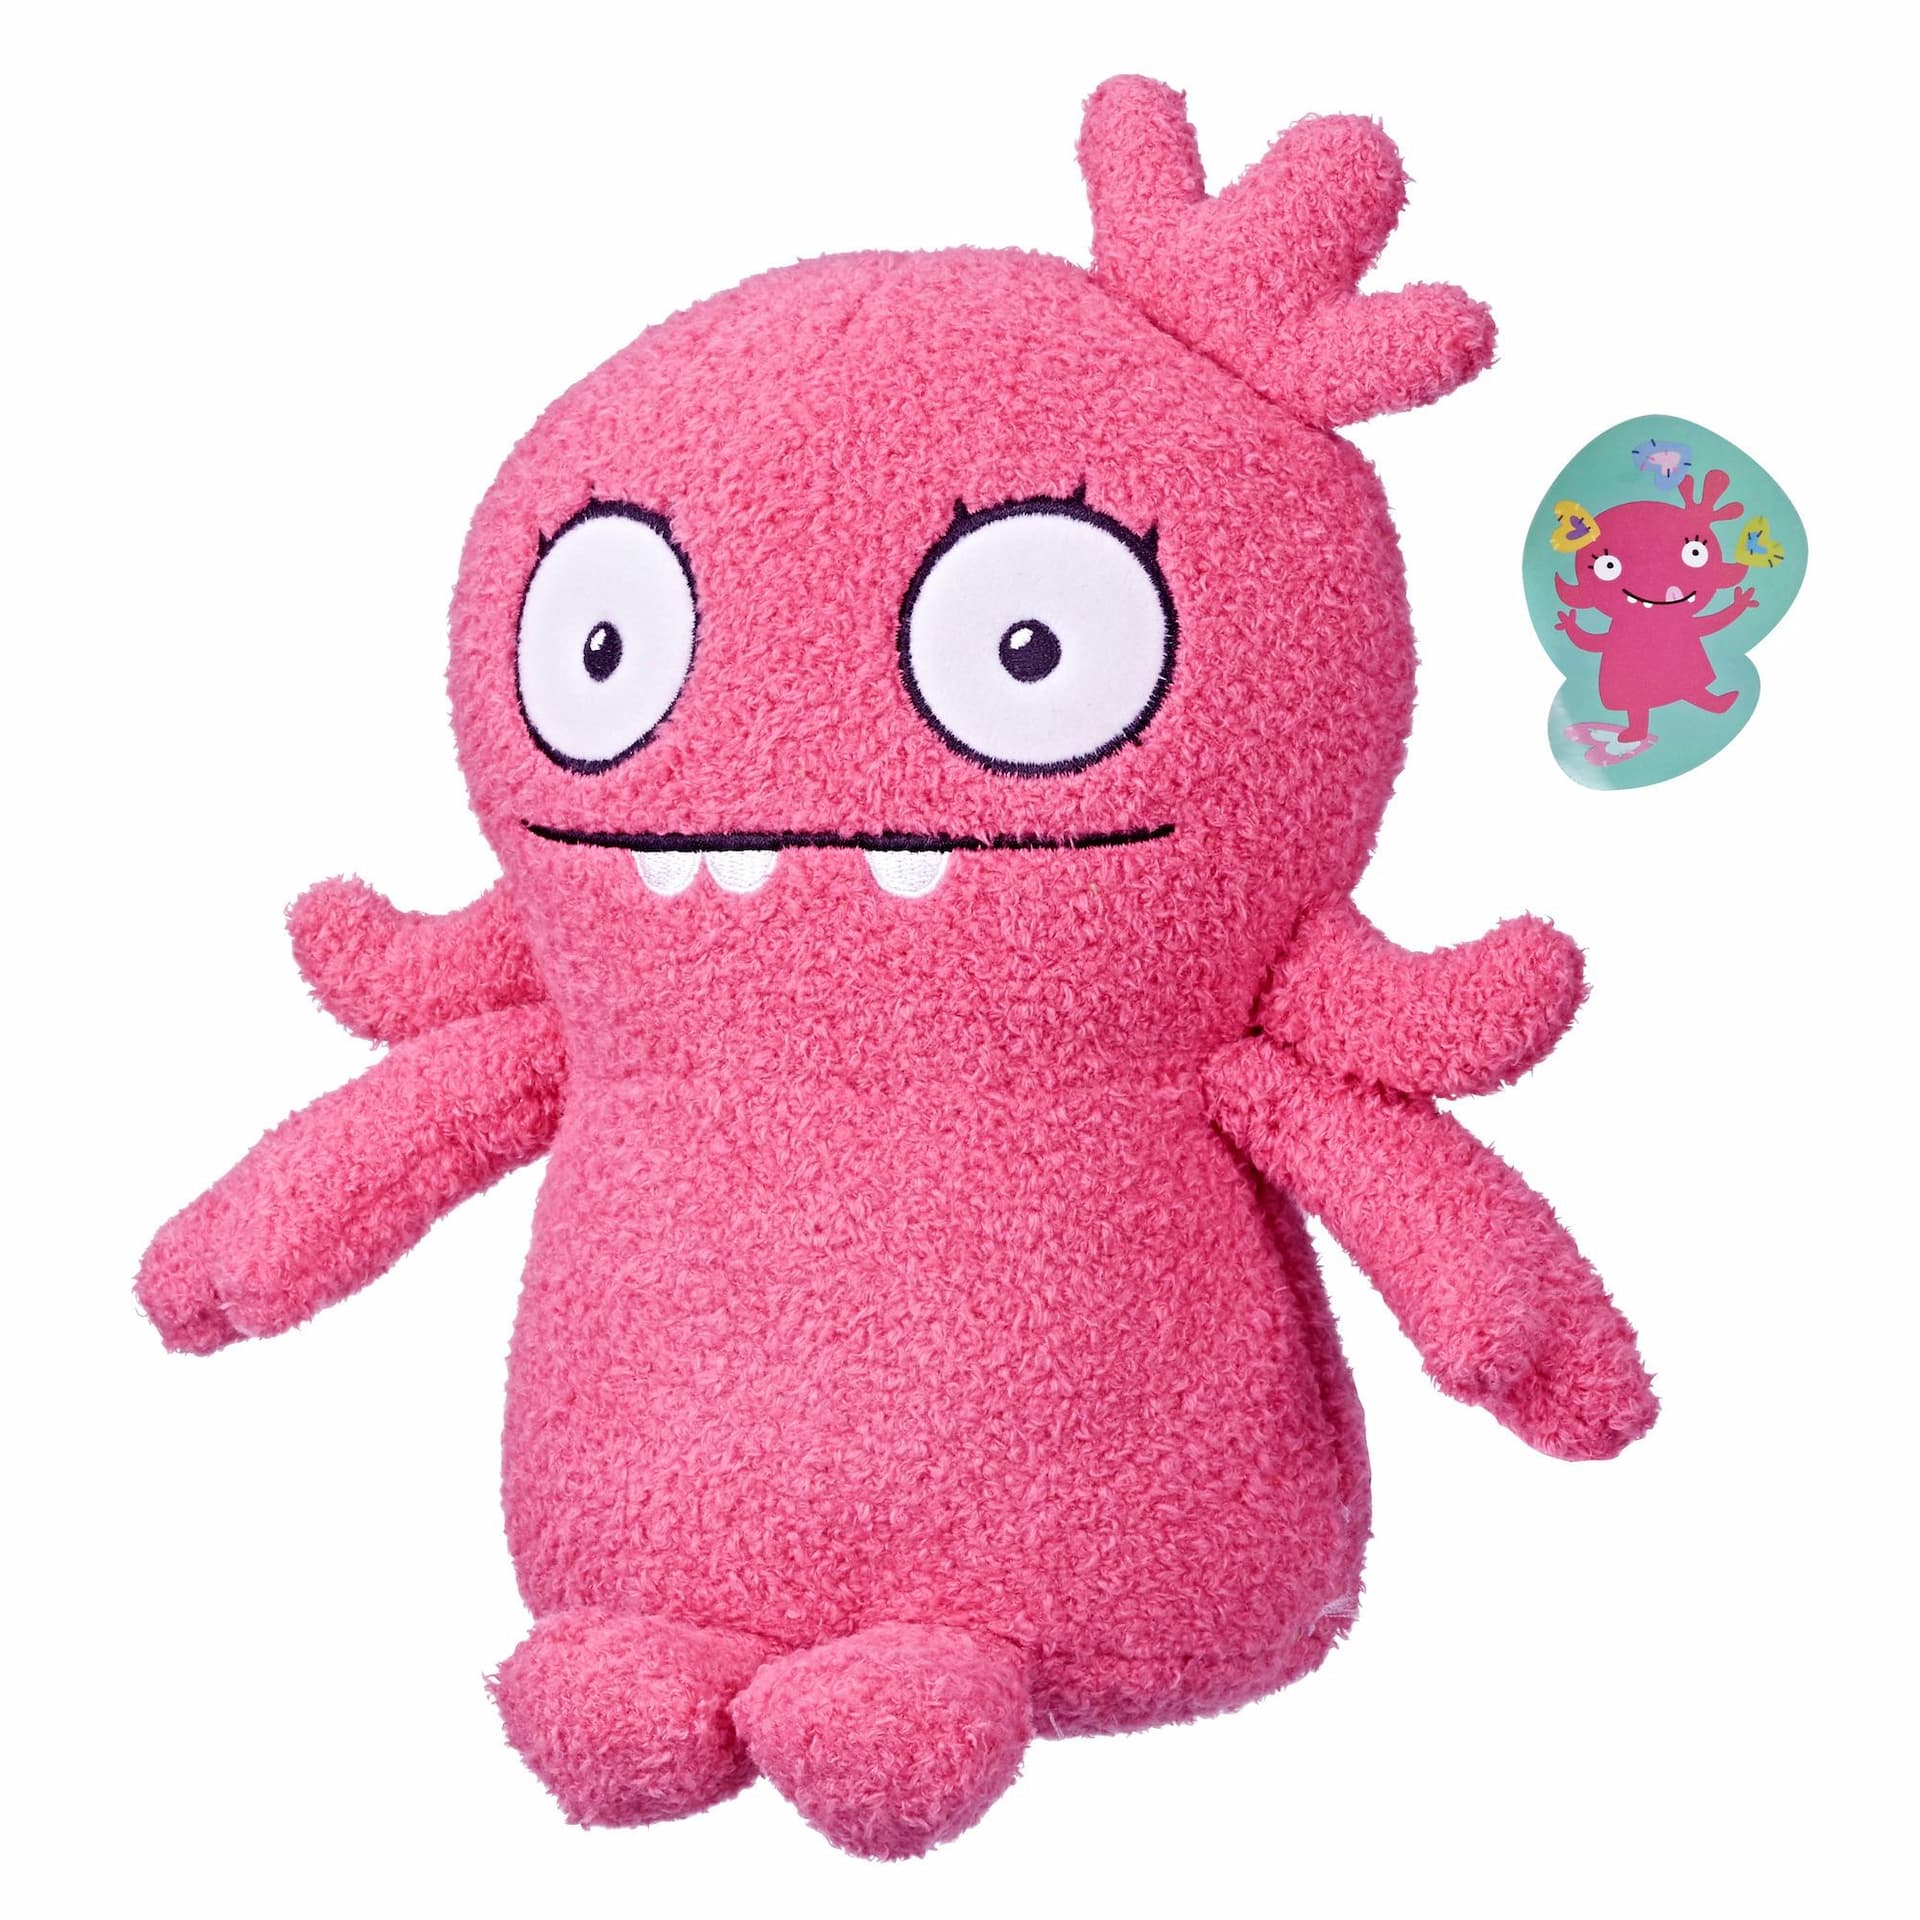 UglyDolls Yours Truly Moxy Stuffed Plush Toy, 9.75 inches tall